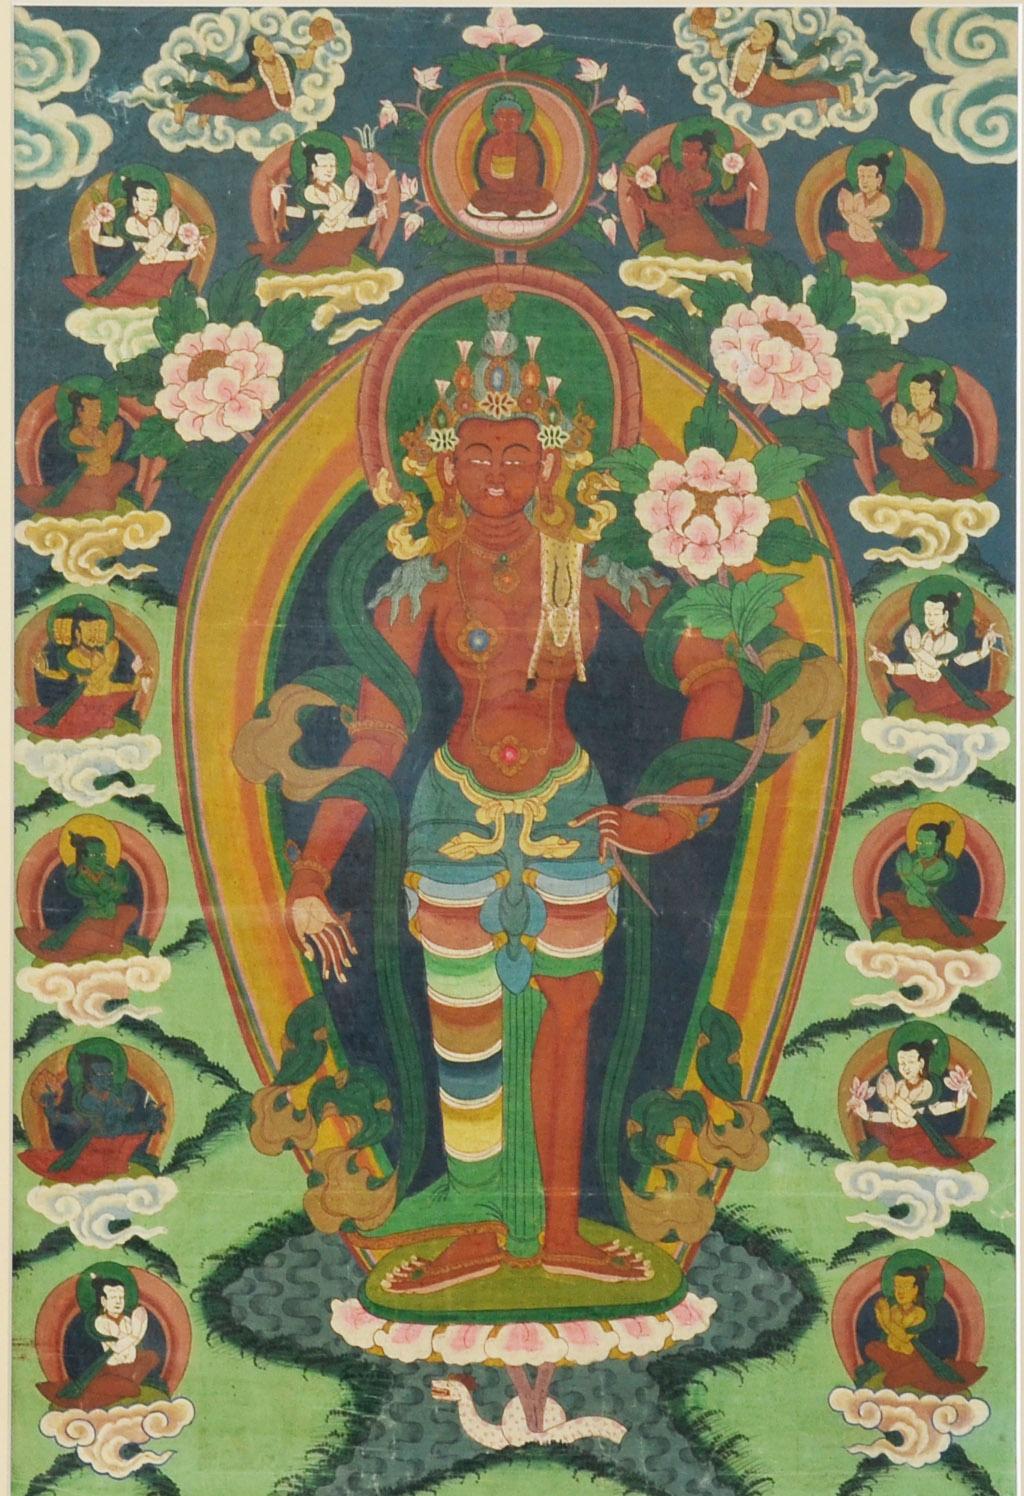 Indian Ceremonial Hindu Deity Hand-Painted on Canvas in Gilded Frame In Good Condition For Sale In Yonkers, NY